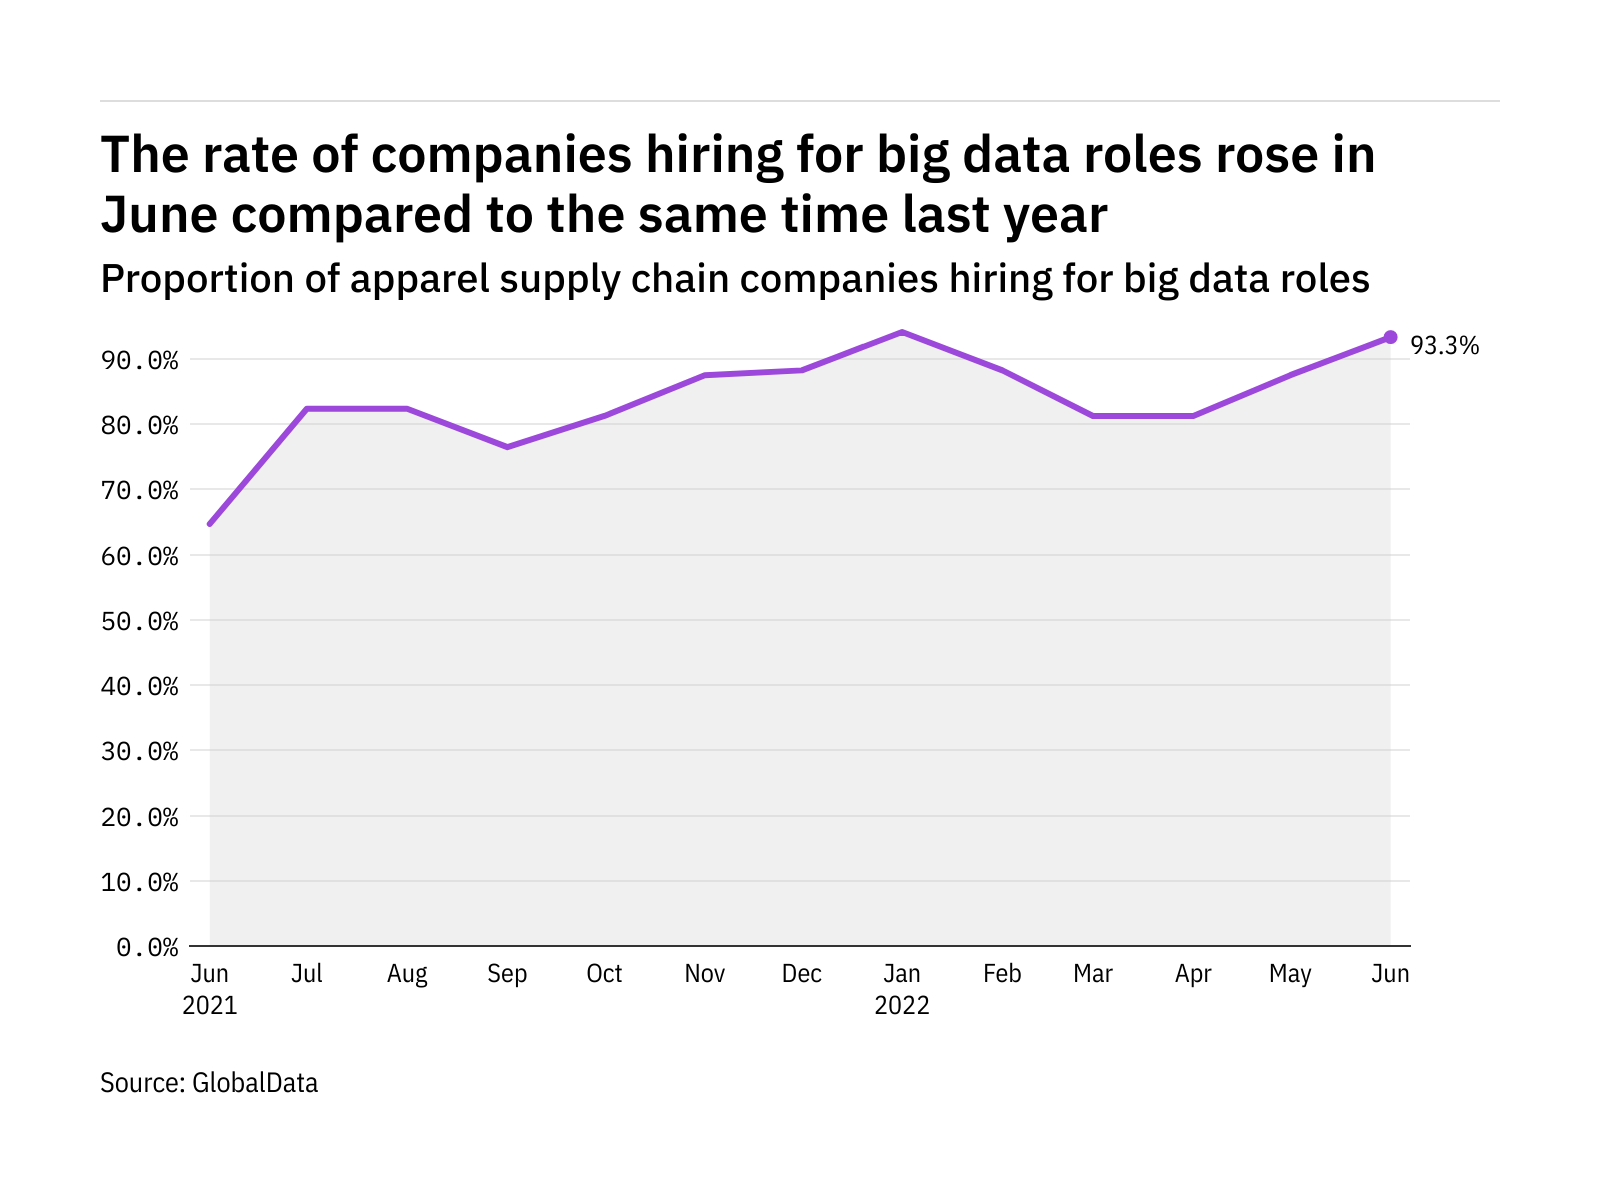 Big data hiring levels in the apparel industry rose in June